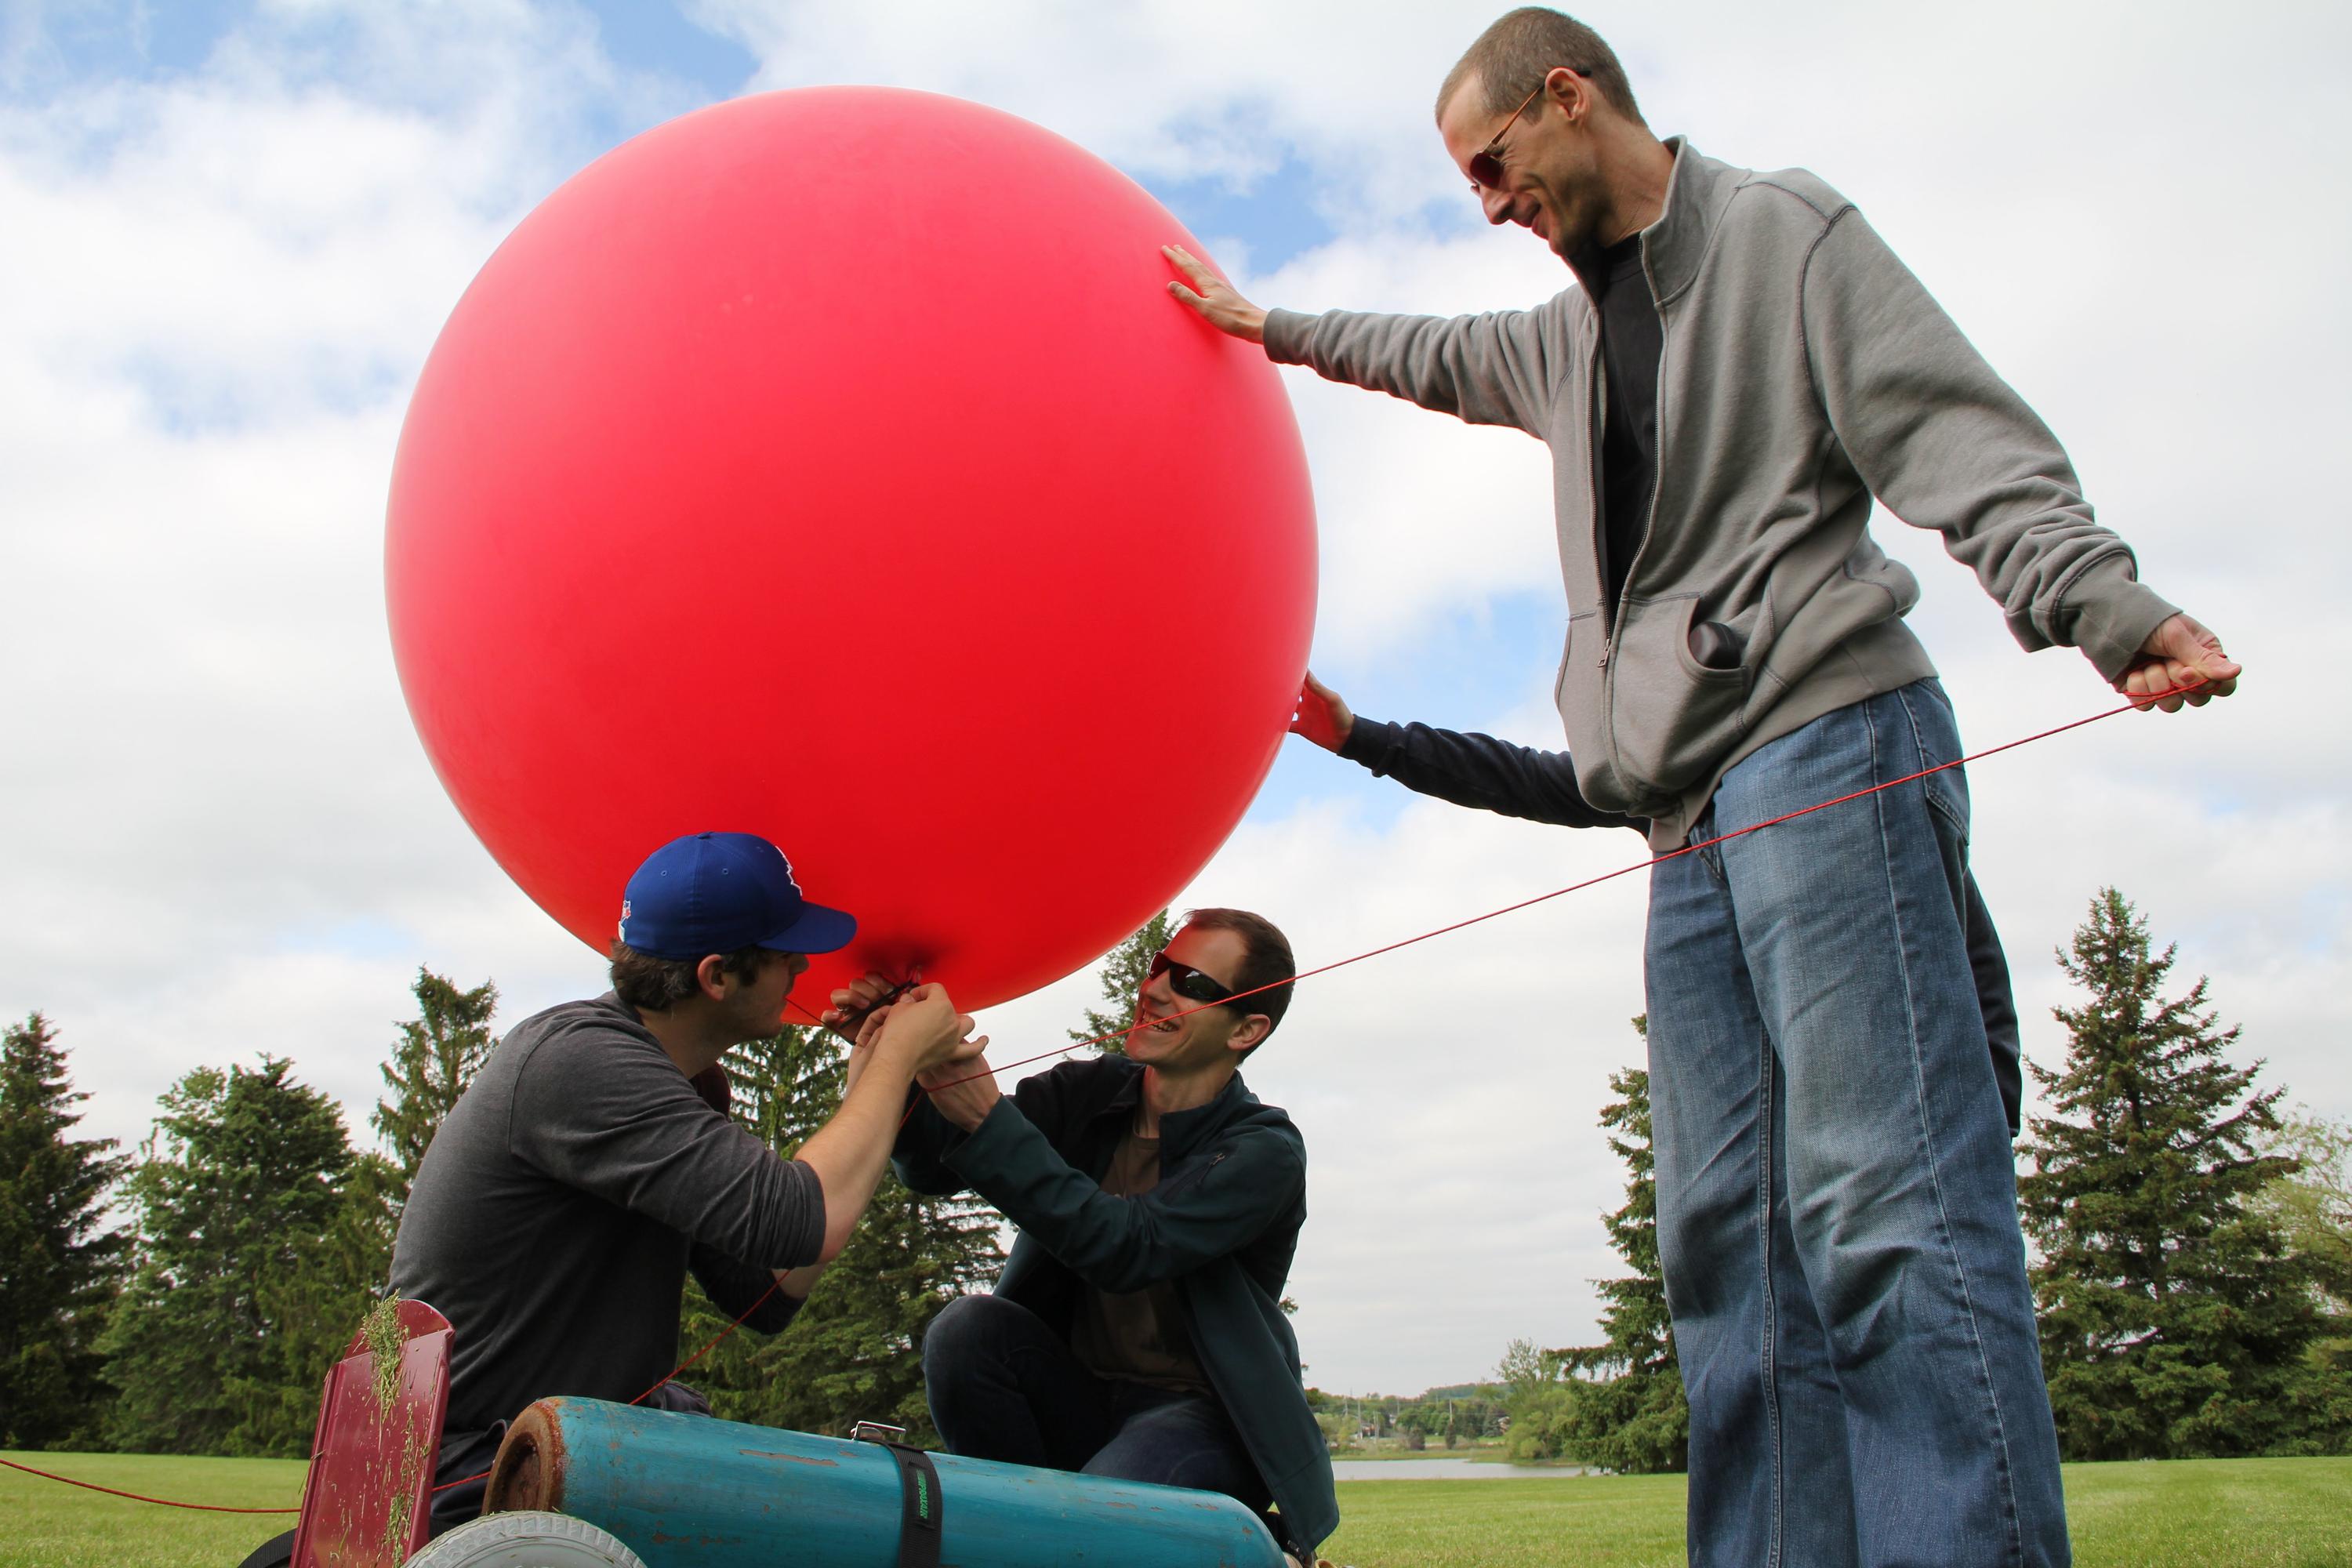 Mike, Peter and Grant setting up the balloon.